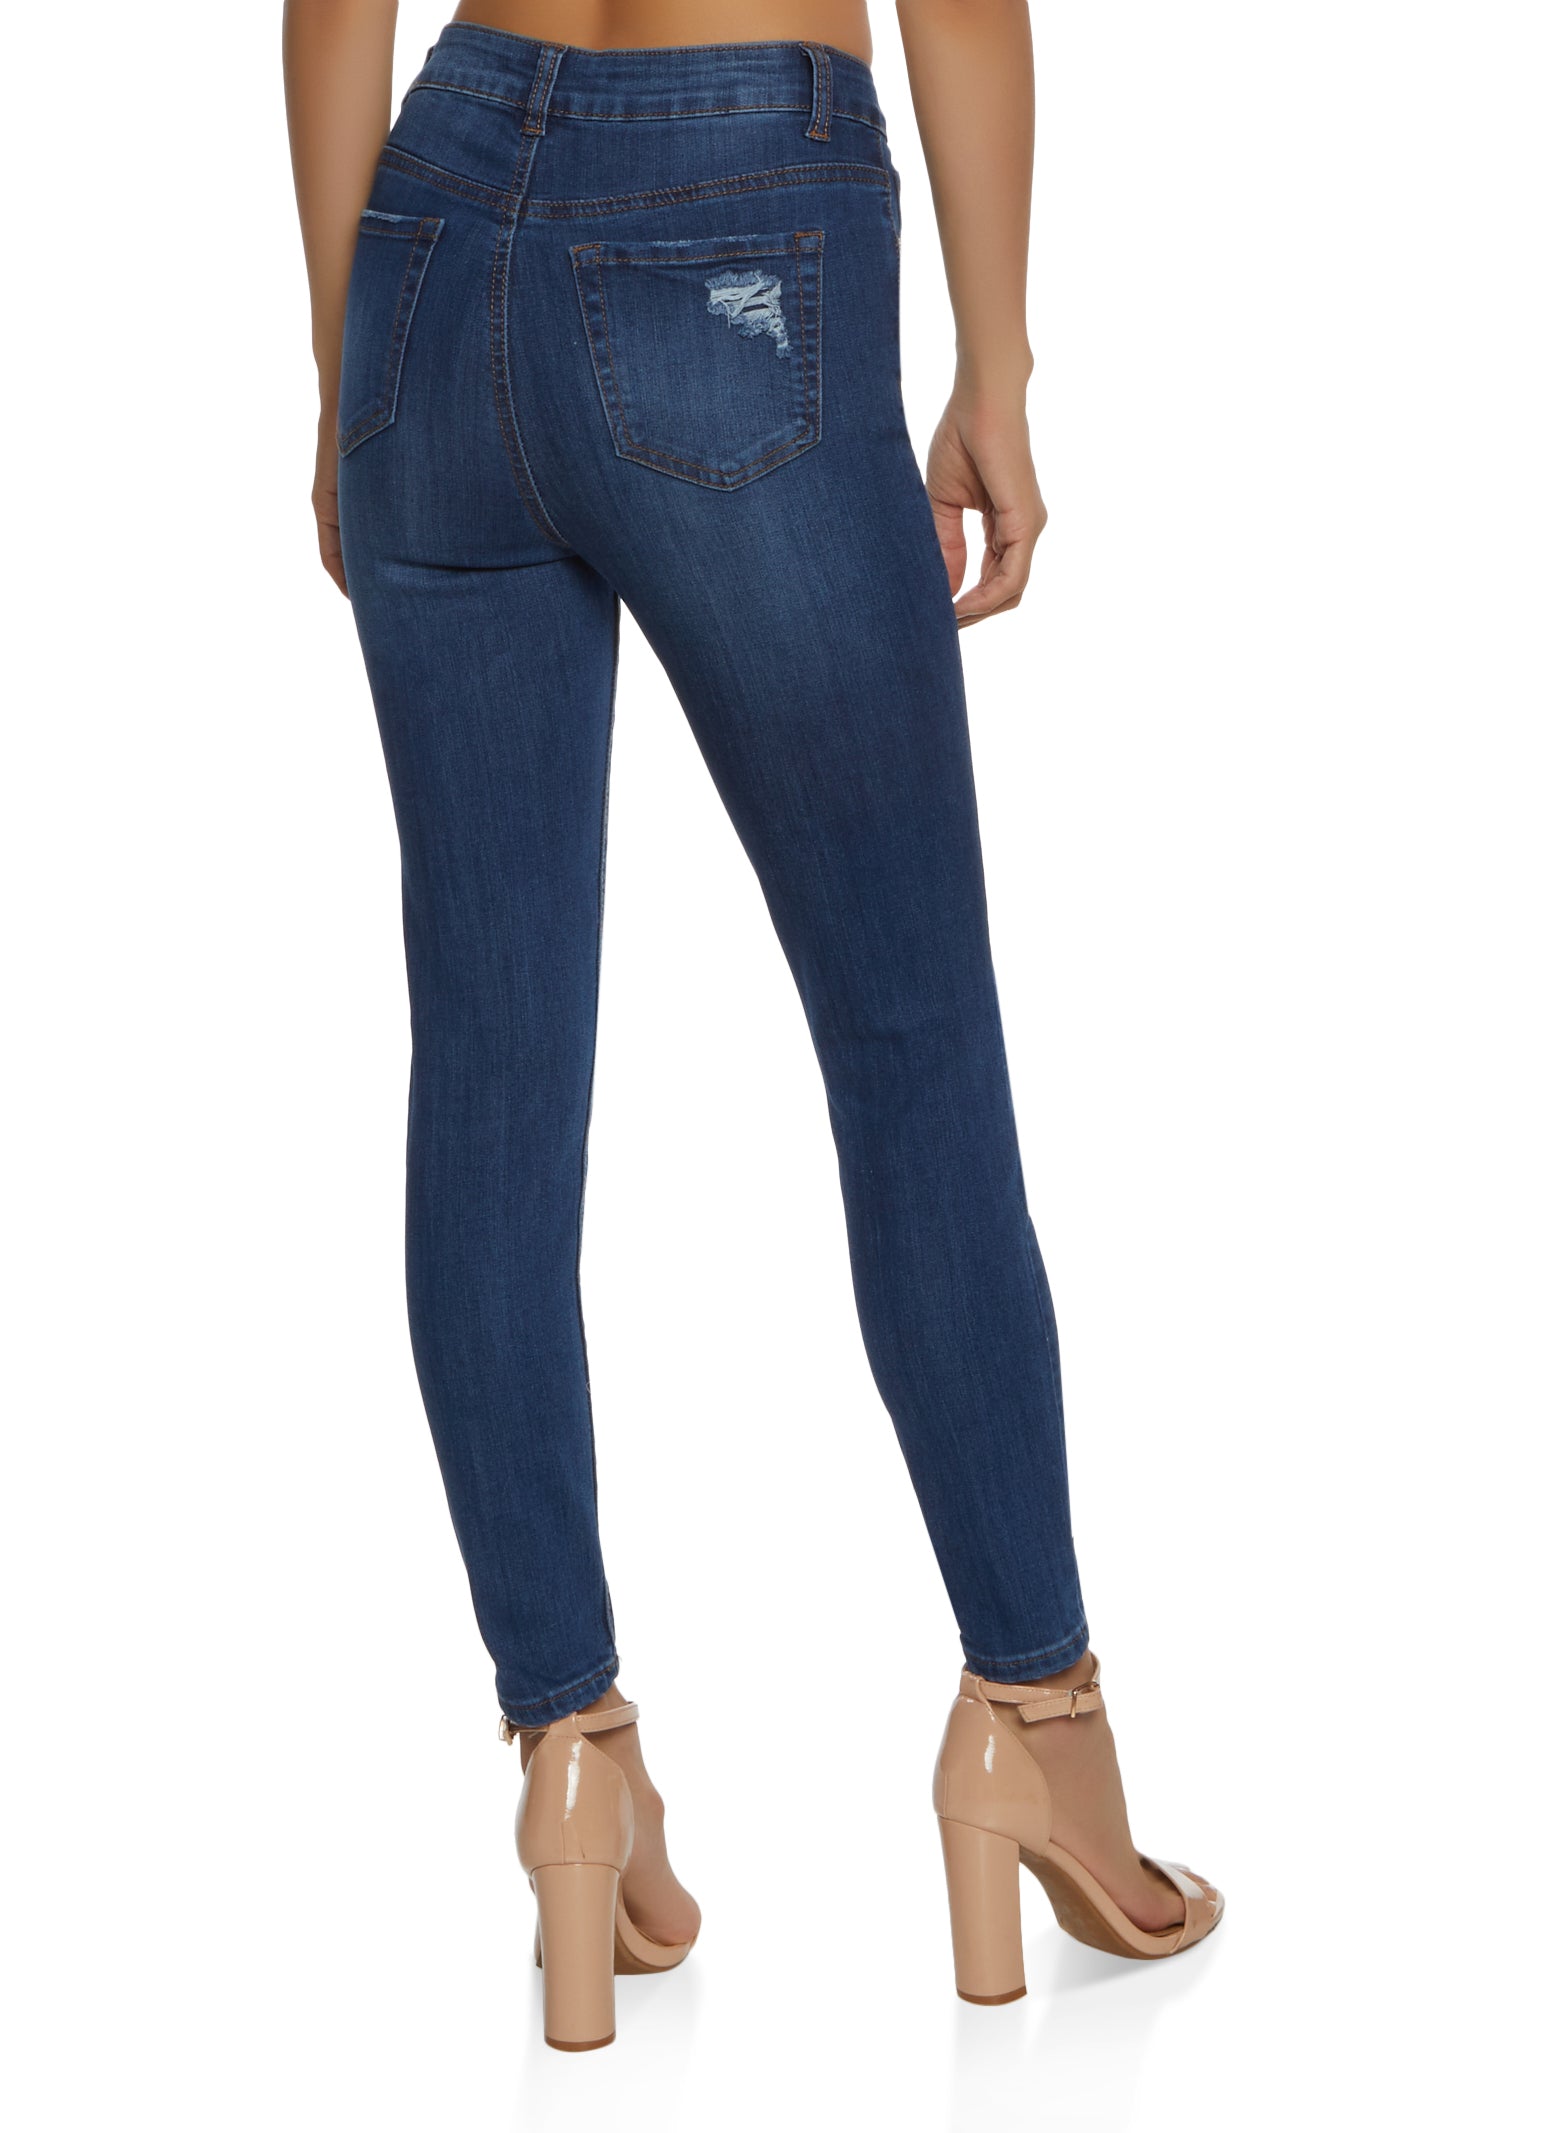 WAX Stretch Distressed High Waisted Jeans